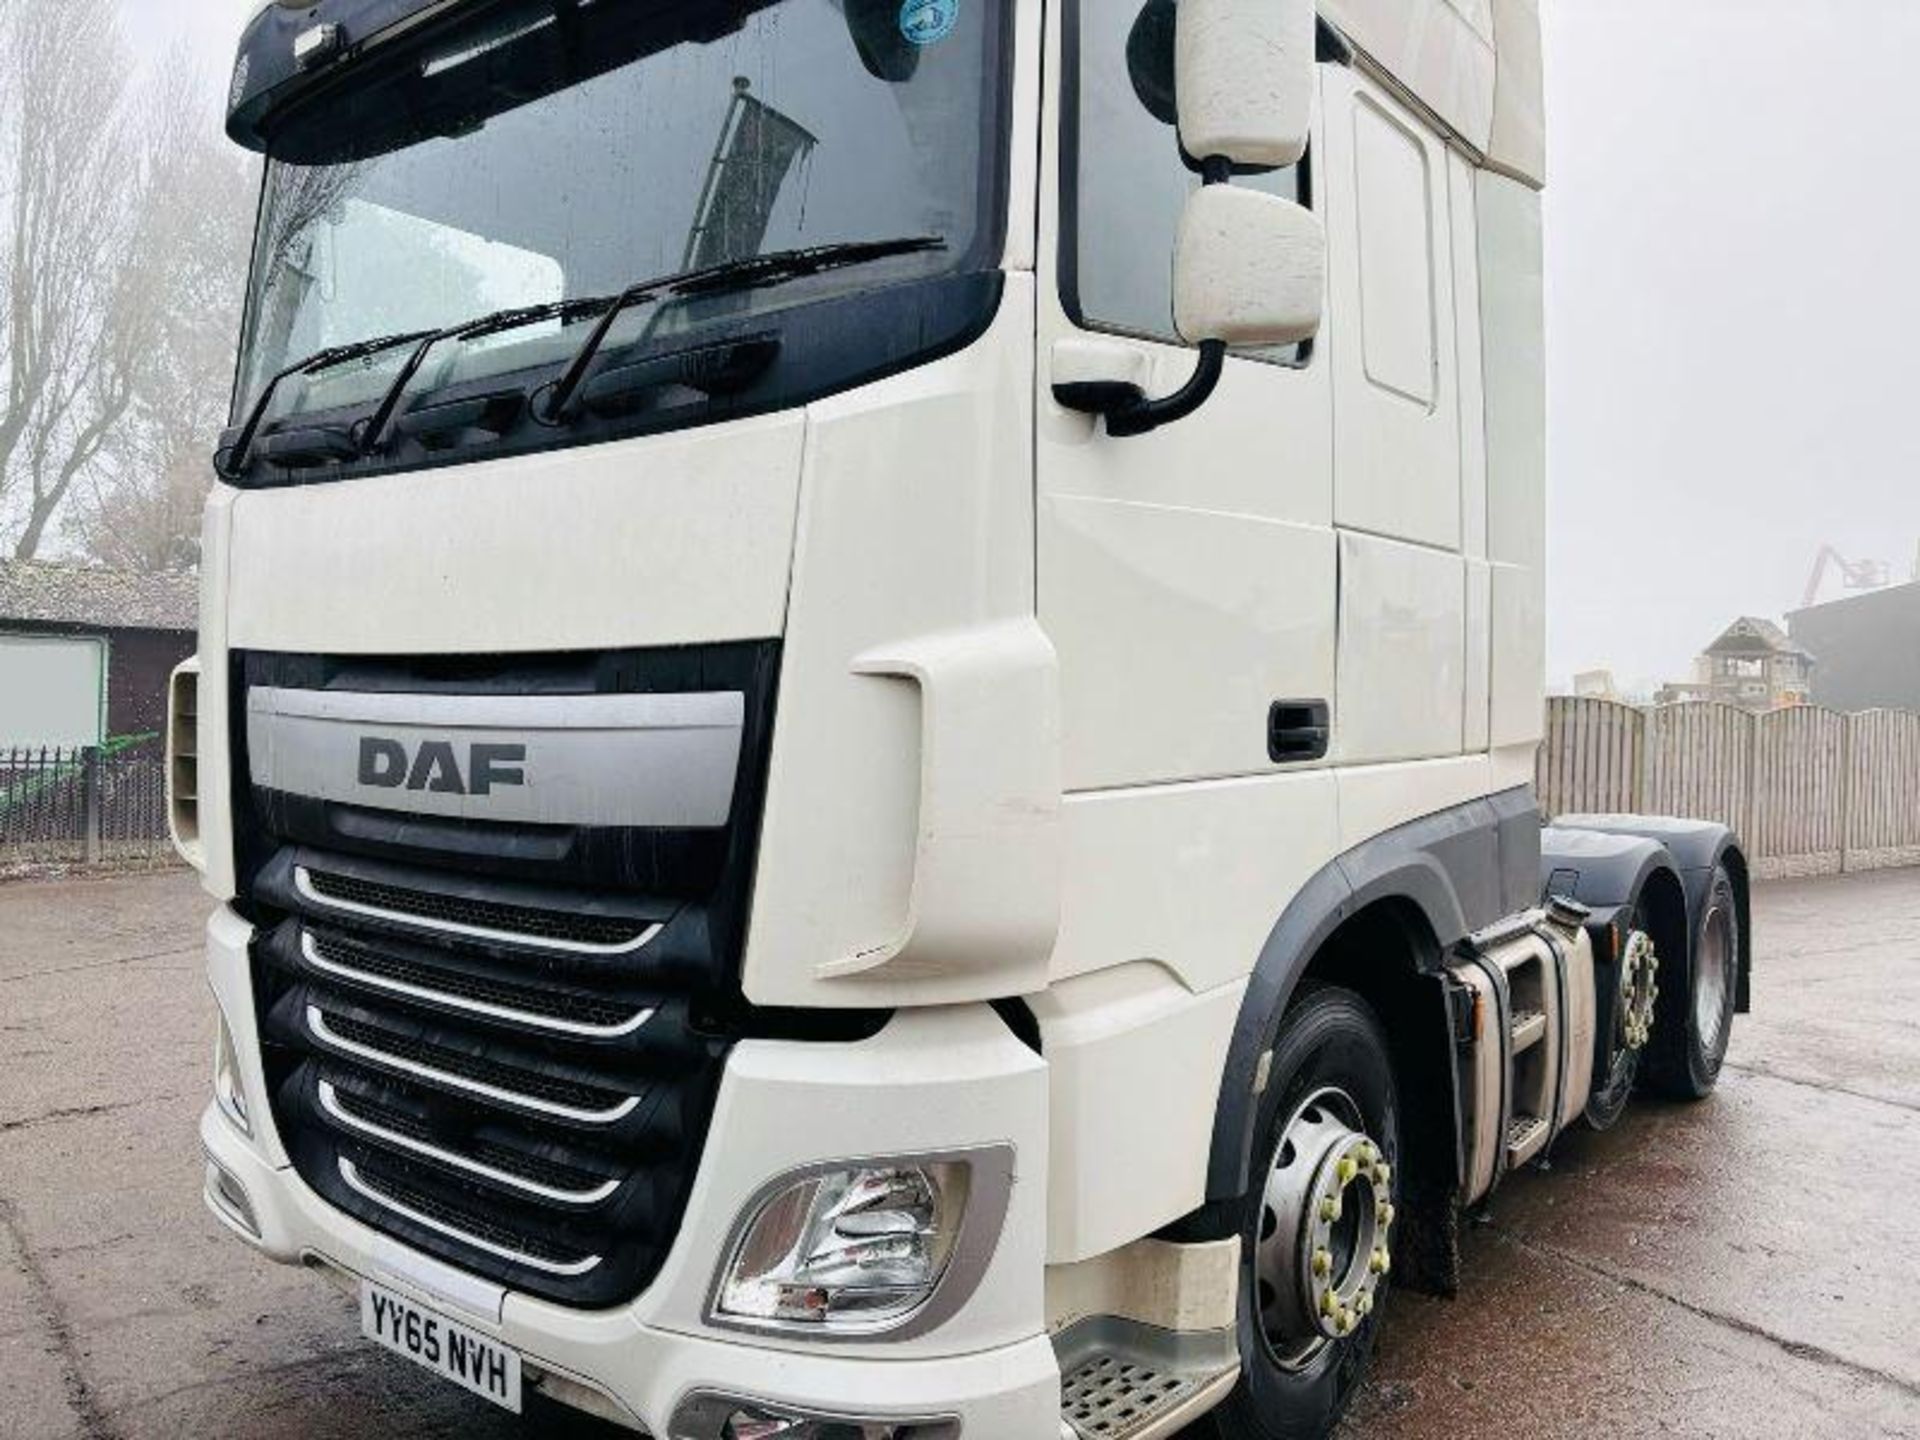 DAF XF510 6X2 TRACTOR UNIT *YEAR 2016, MOT'D TILL APRIL 2024* - READING 700328 KMS - Image 17 of 18